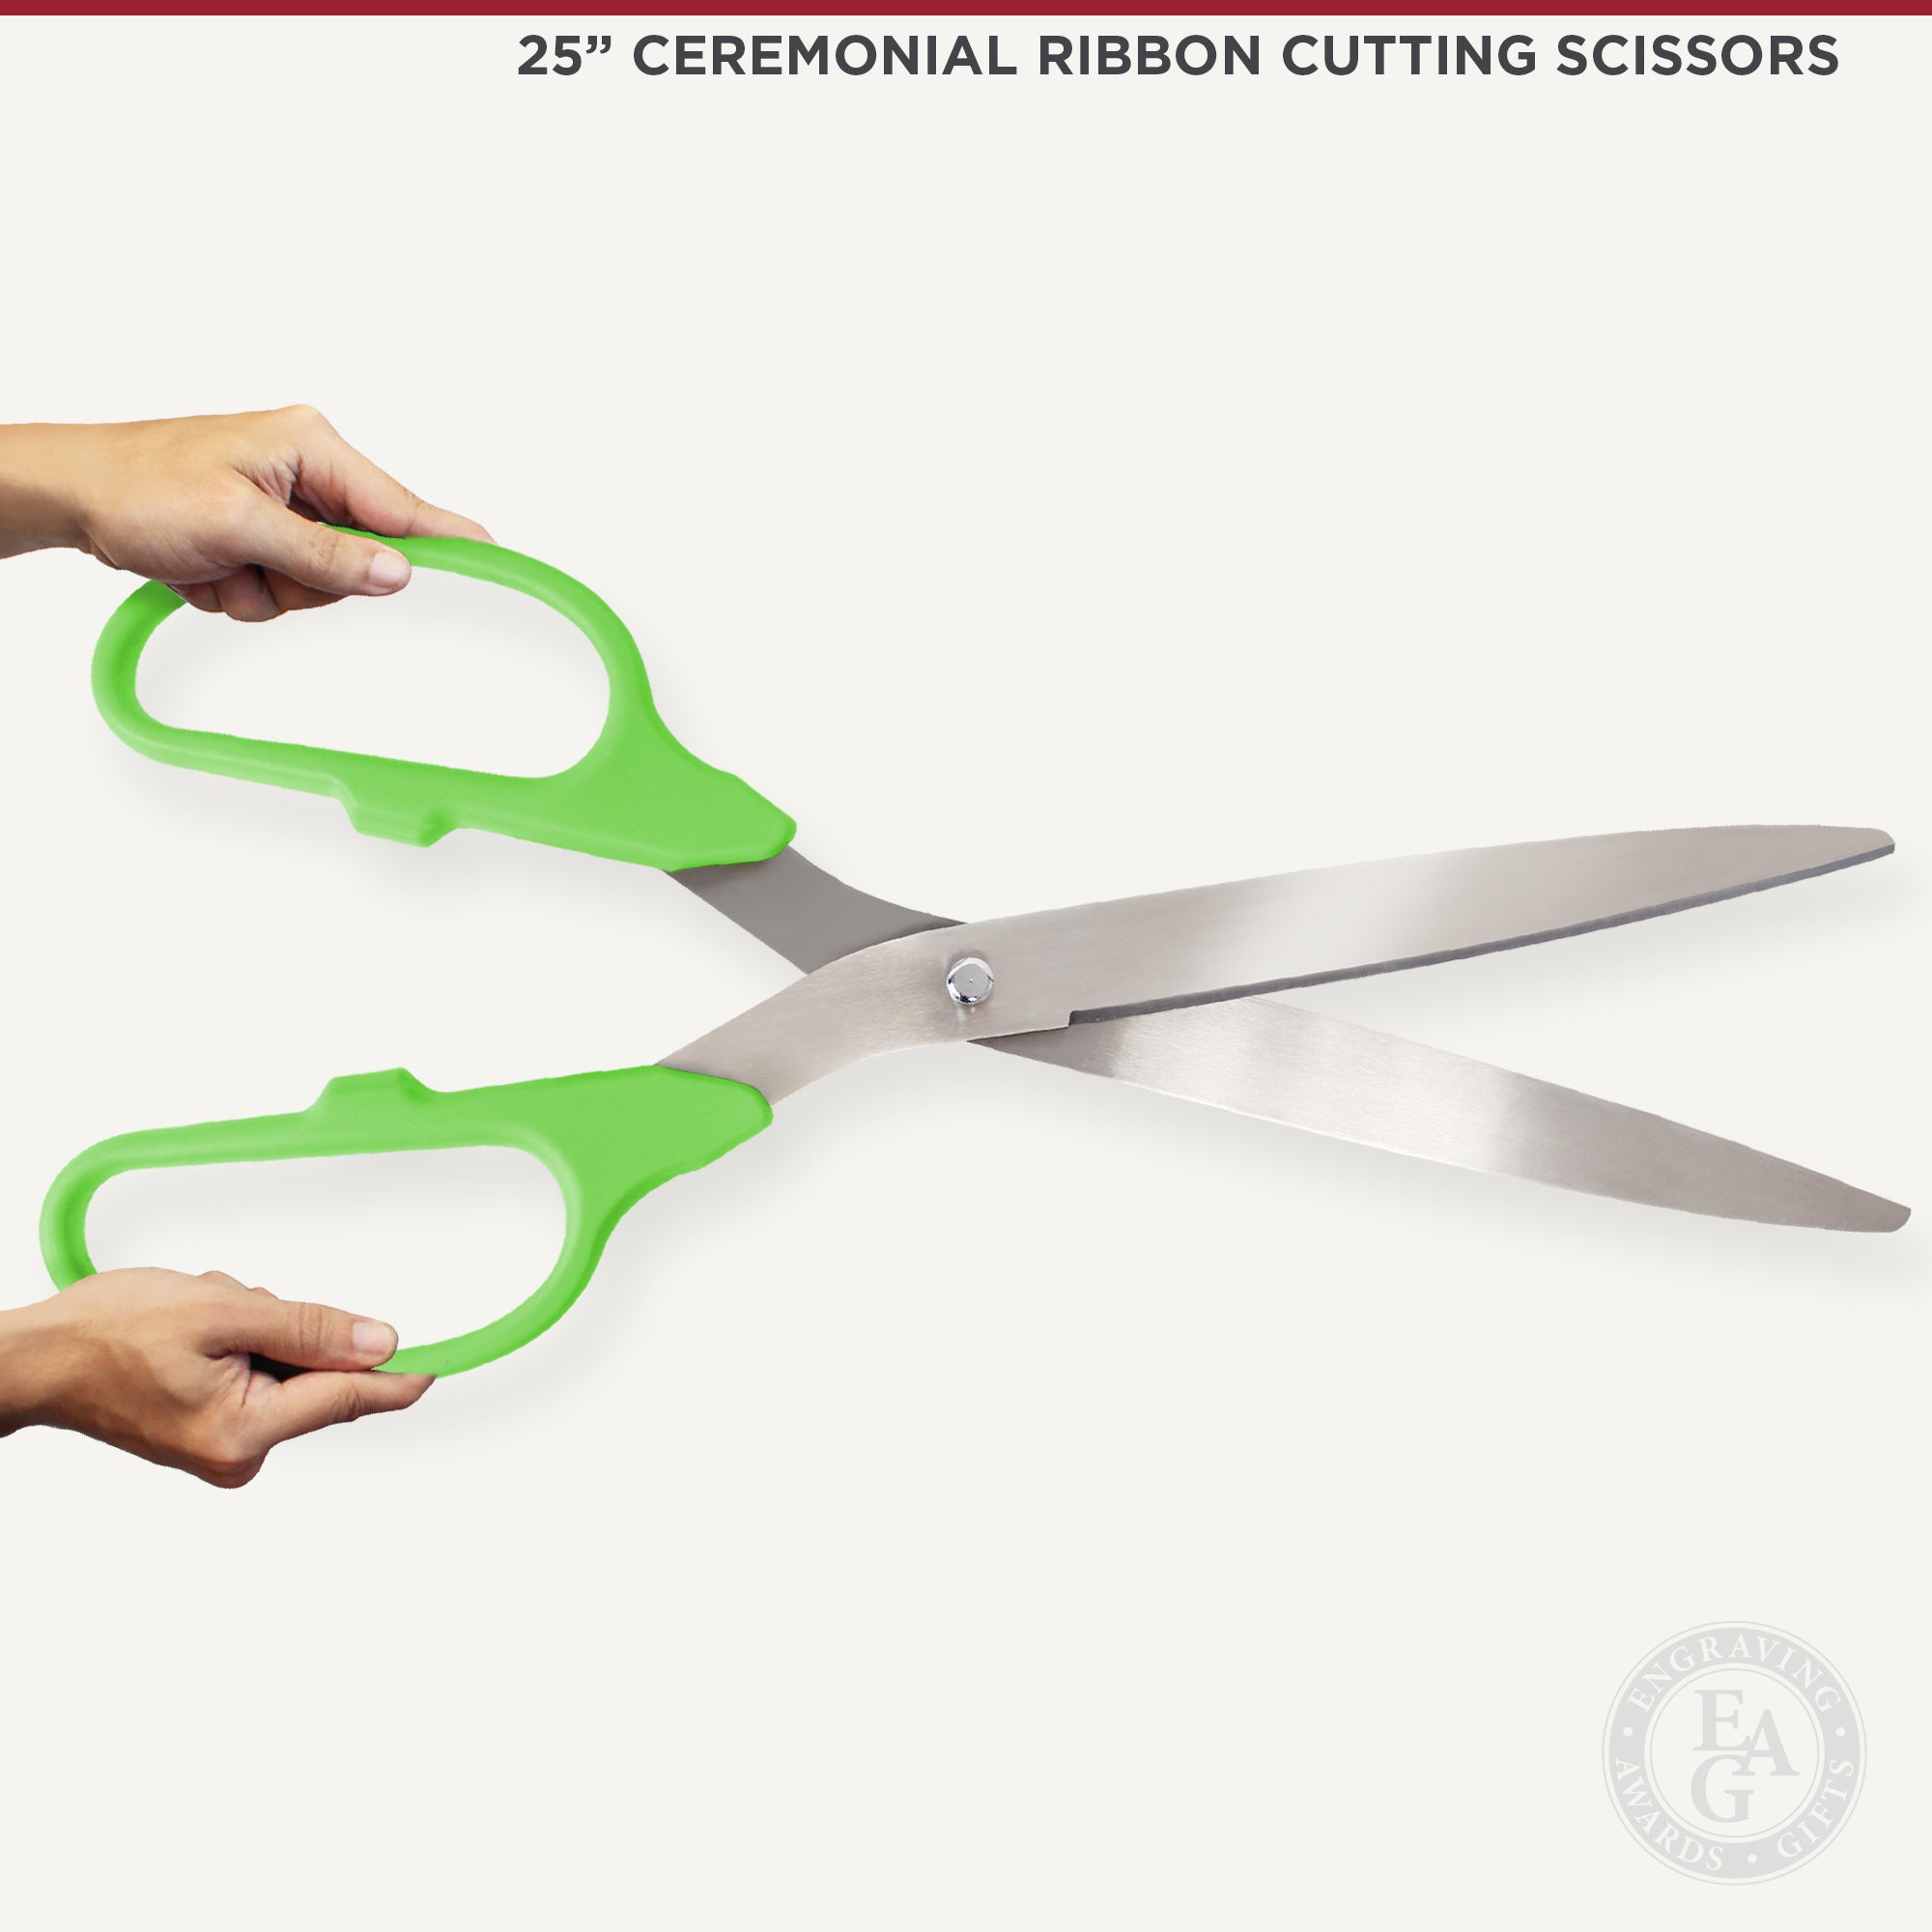 25 Giant Scissors for Ribbon Cutting Ceremony Ribbon Cutting Scissors for Speci